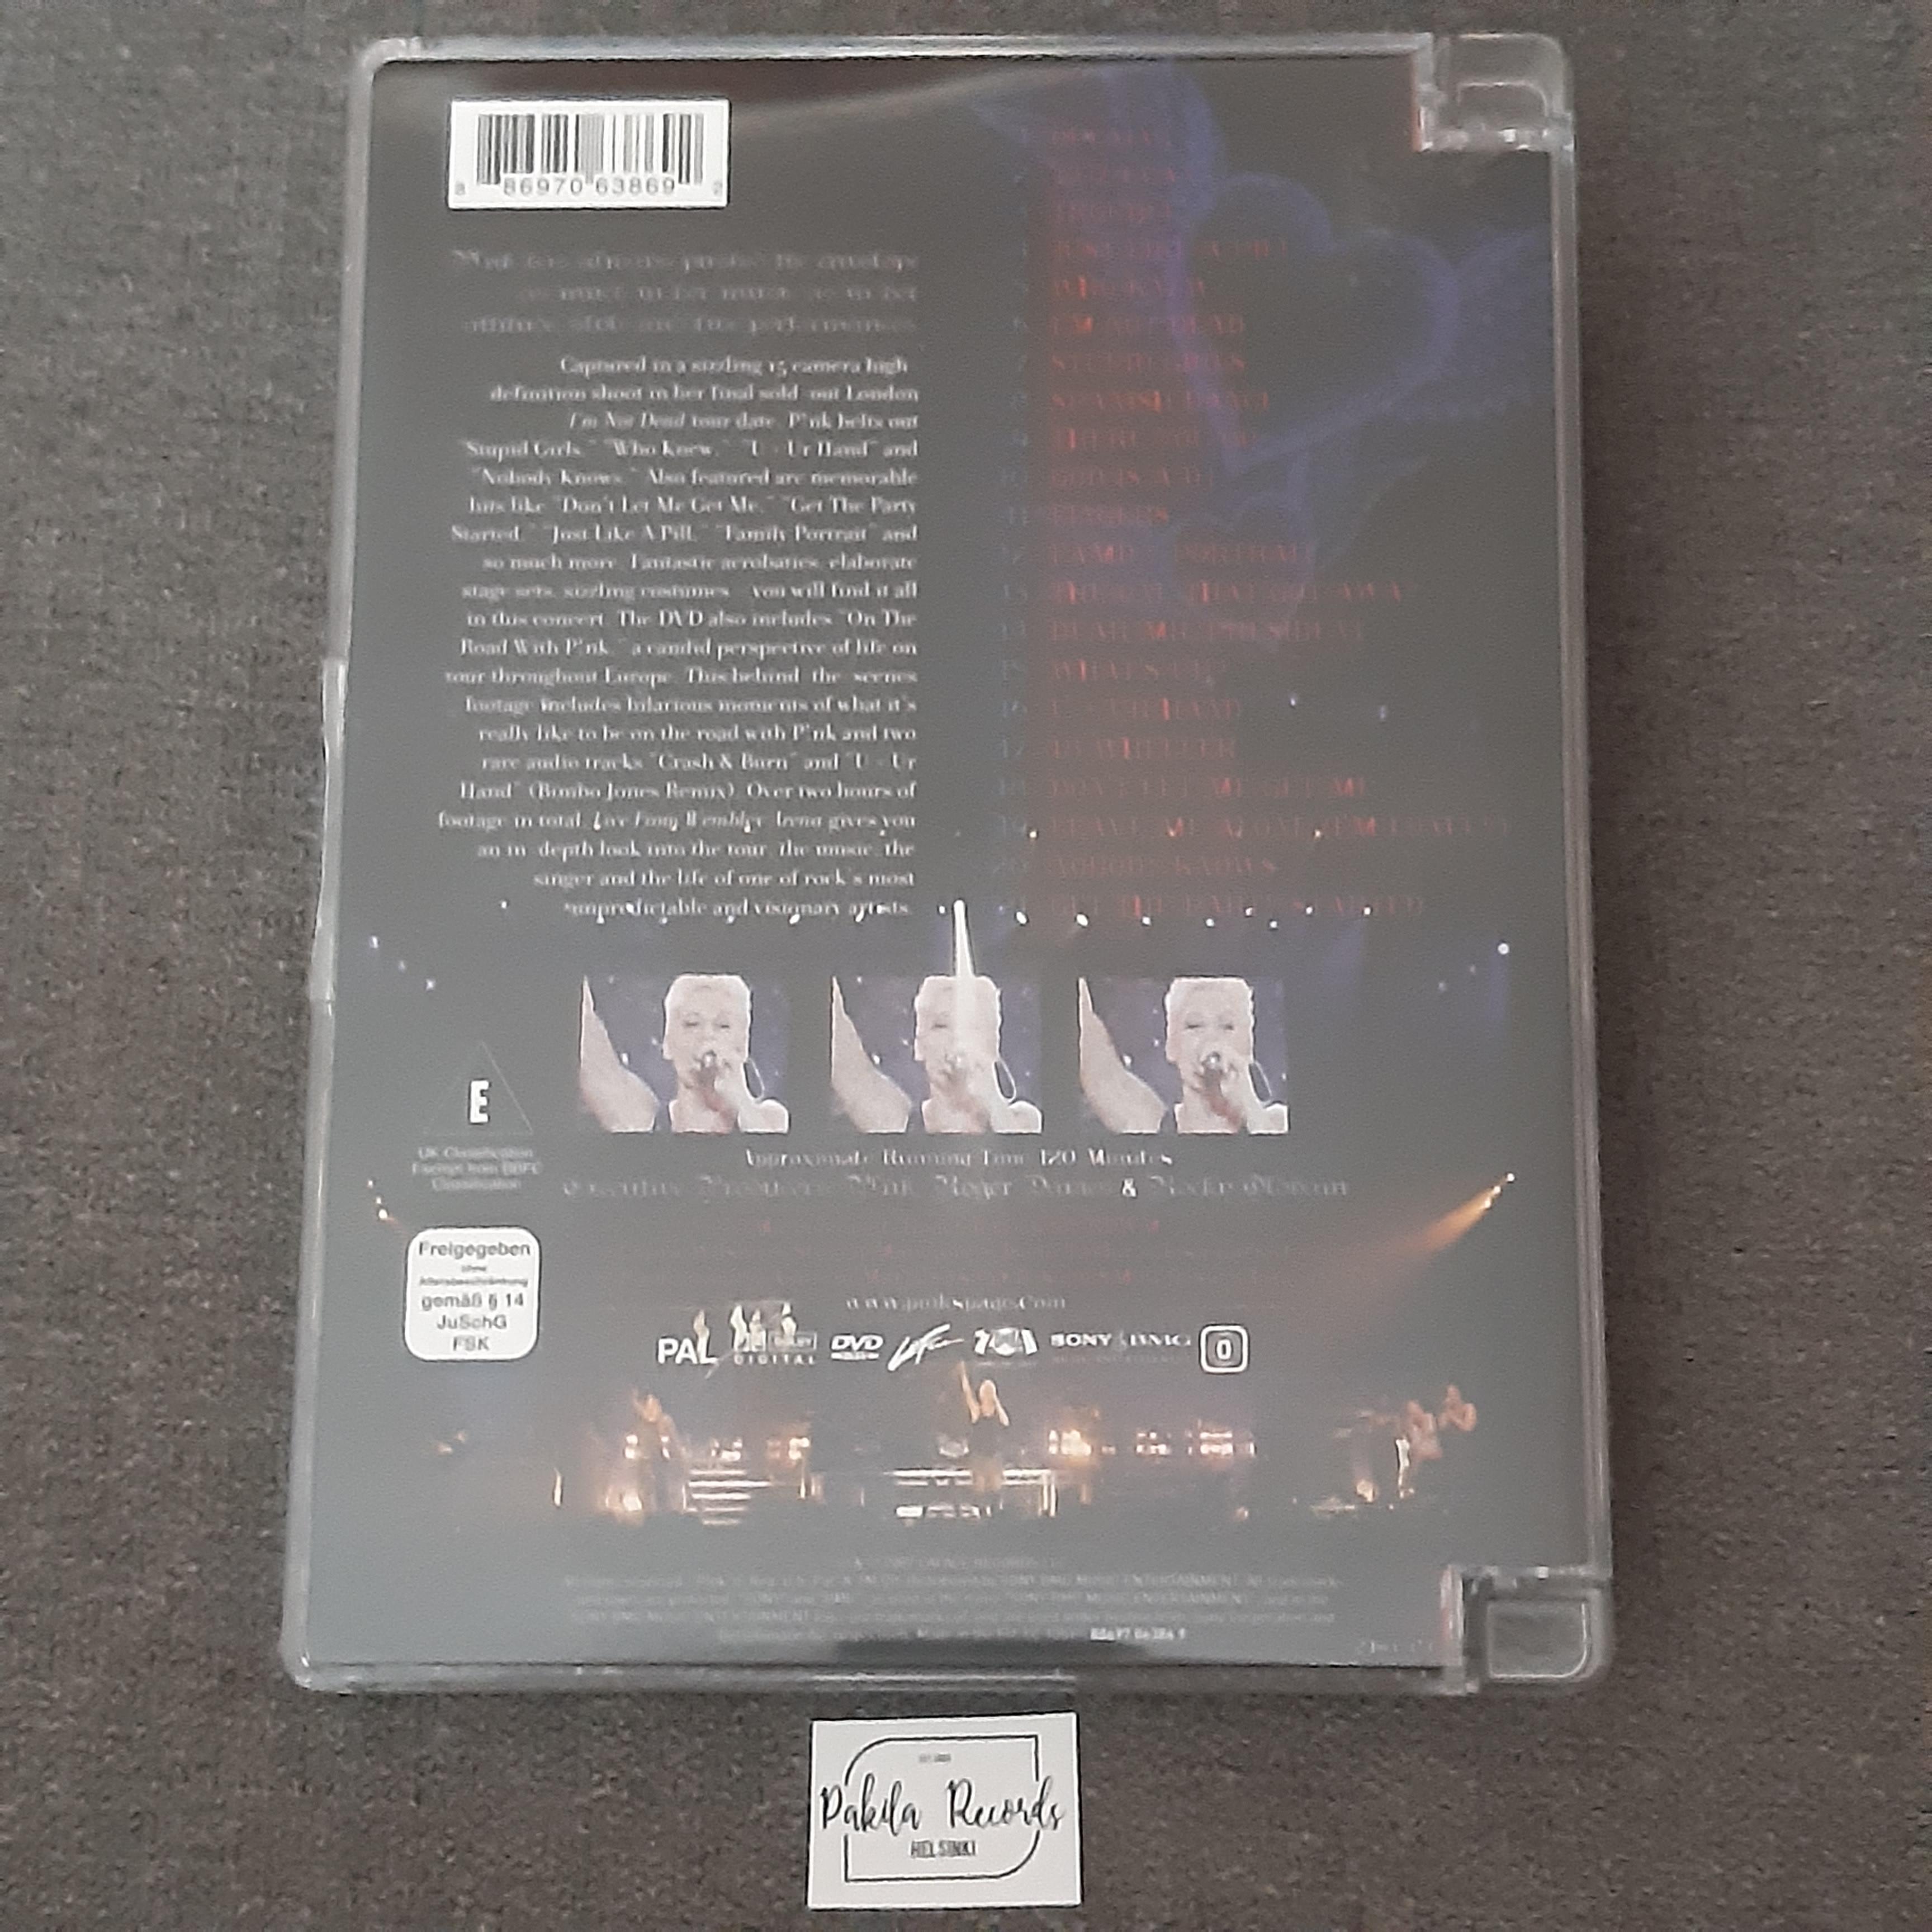 Pink - Live From Wembley Arena London, England - DVD (käytetty)